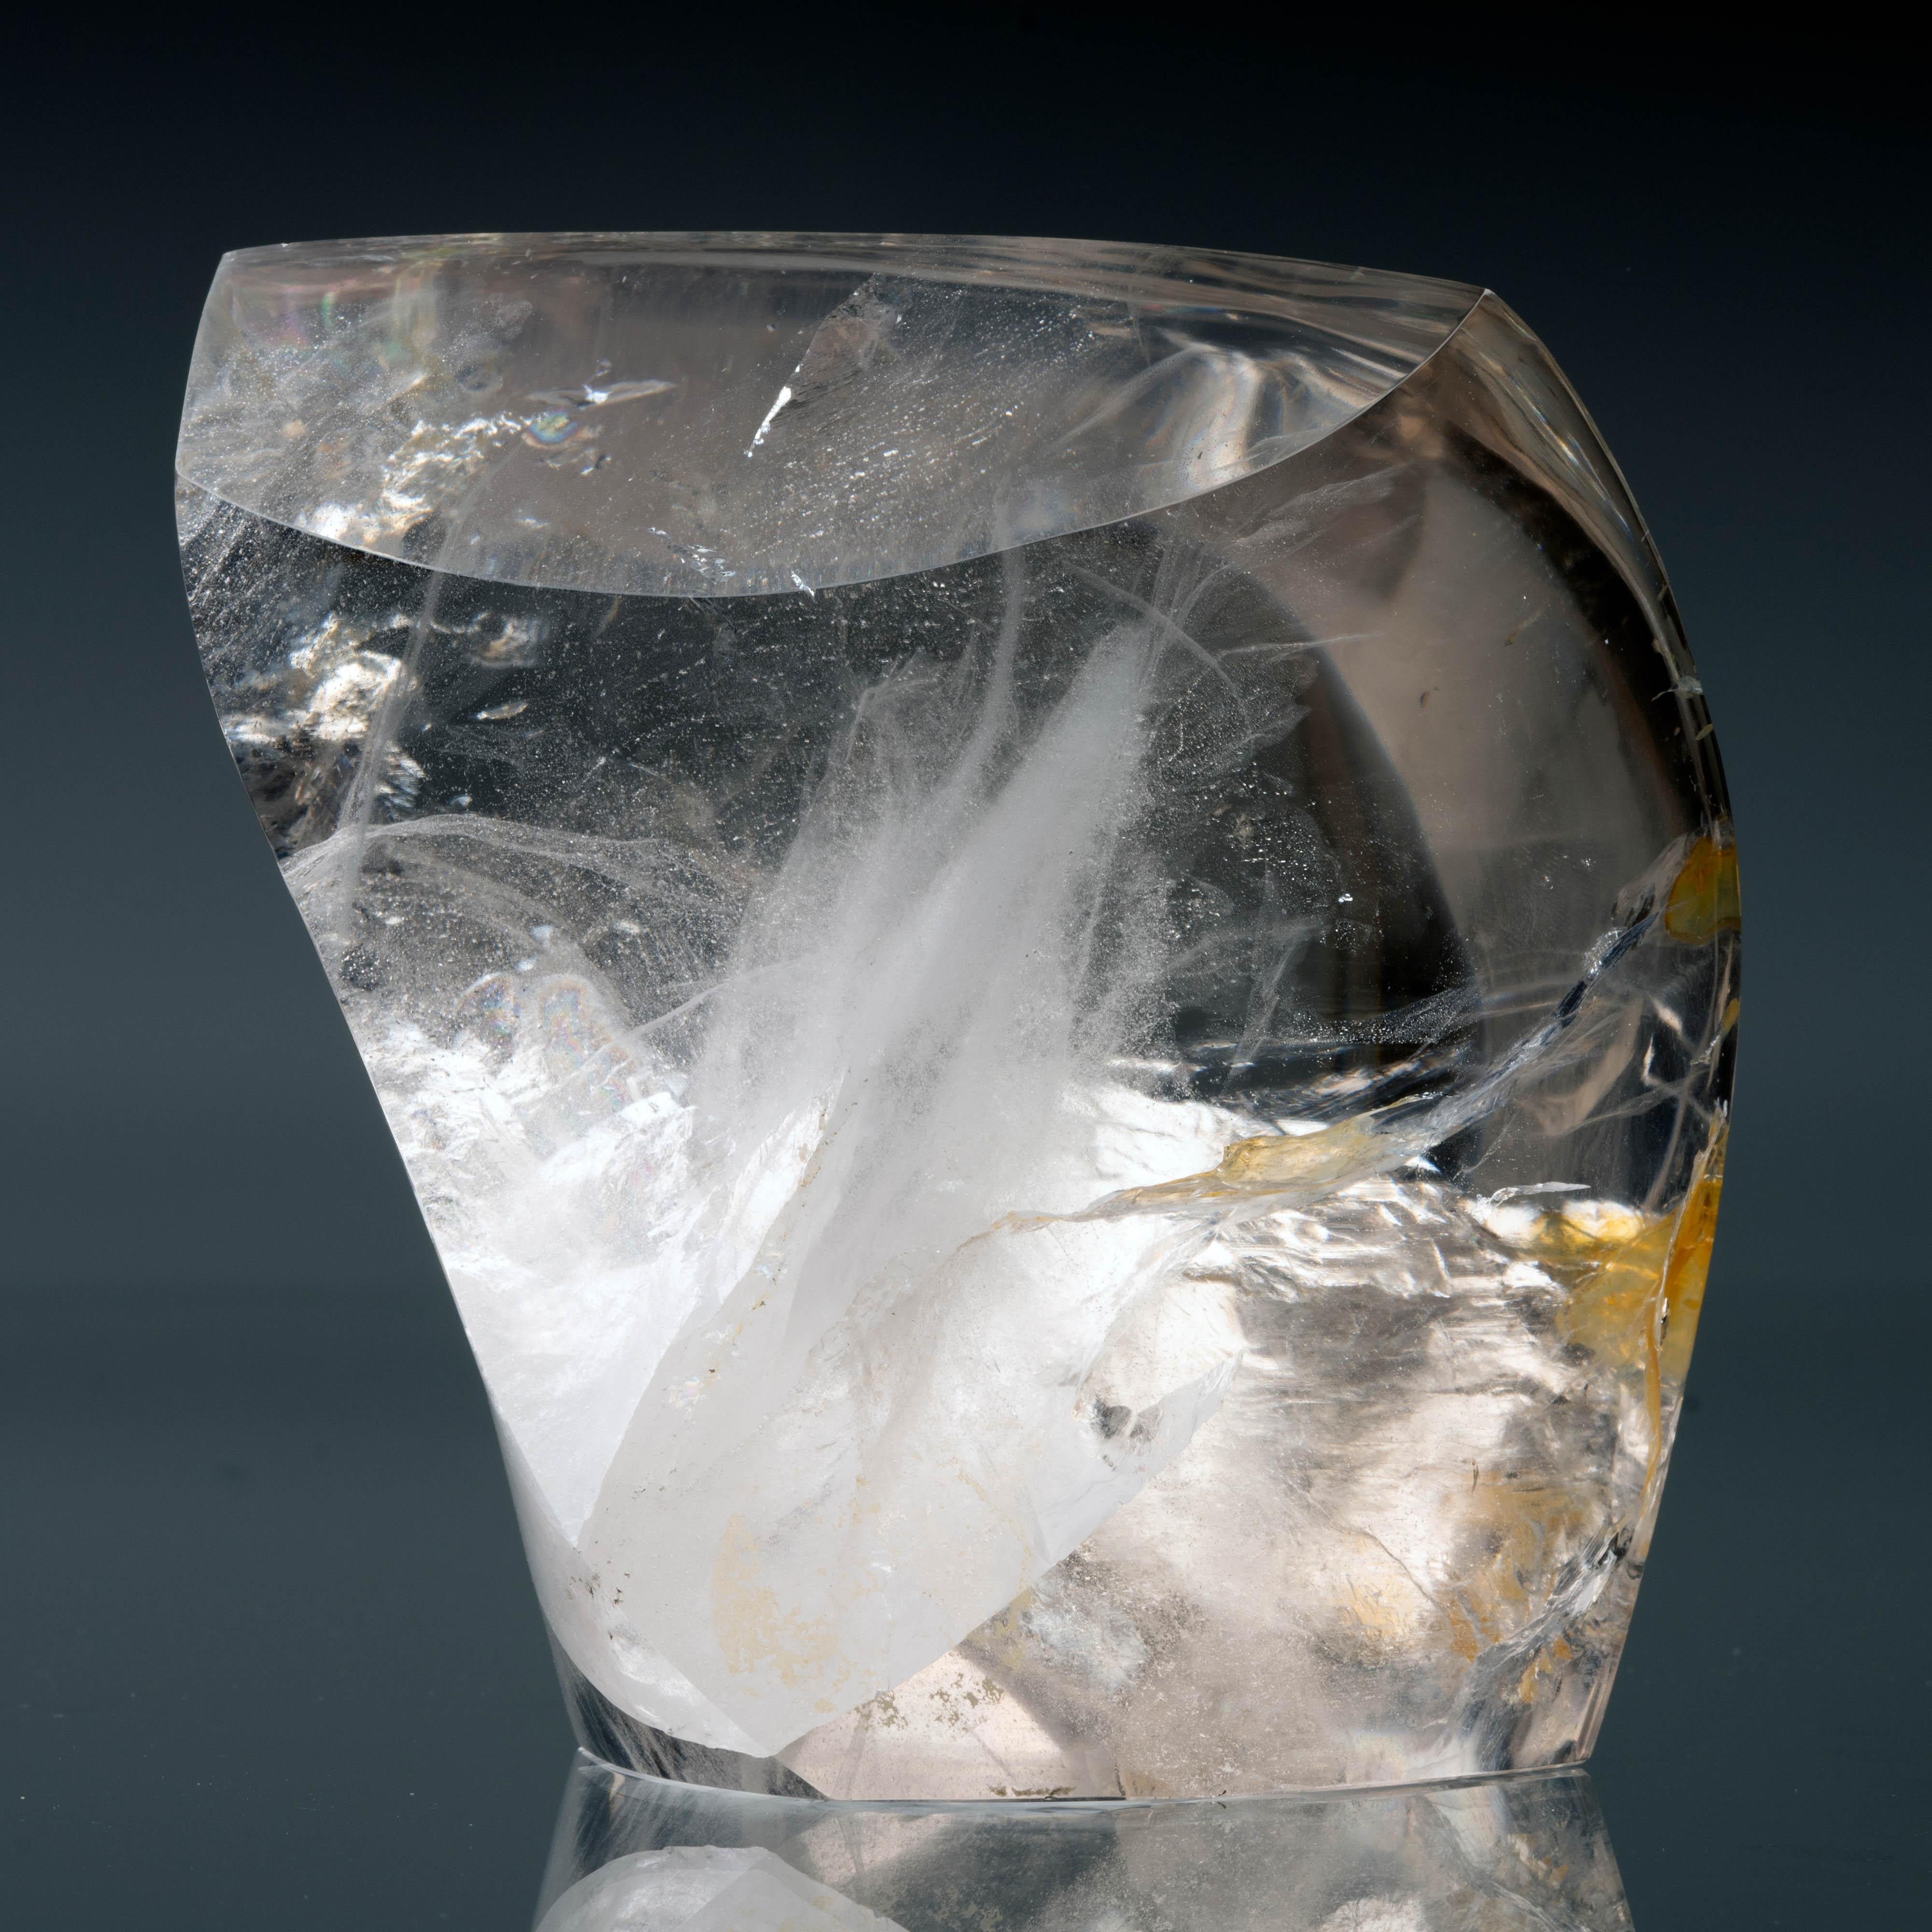 This handsome freeform hand-polished out of lustrous clear quartz from Minas Gerais, Brazil features unique, wisp-like inclusions in its interior. Minas Gerais is famous for having produced the largest quantity of quartz crystals in the world and